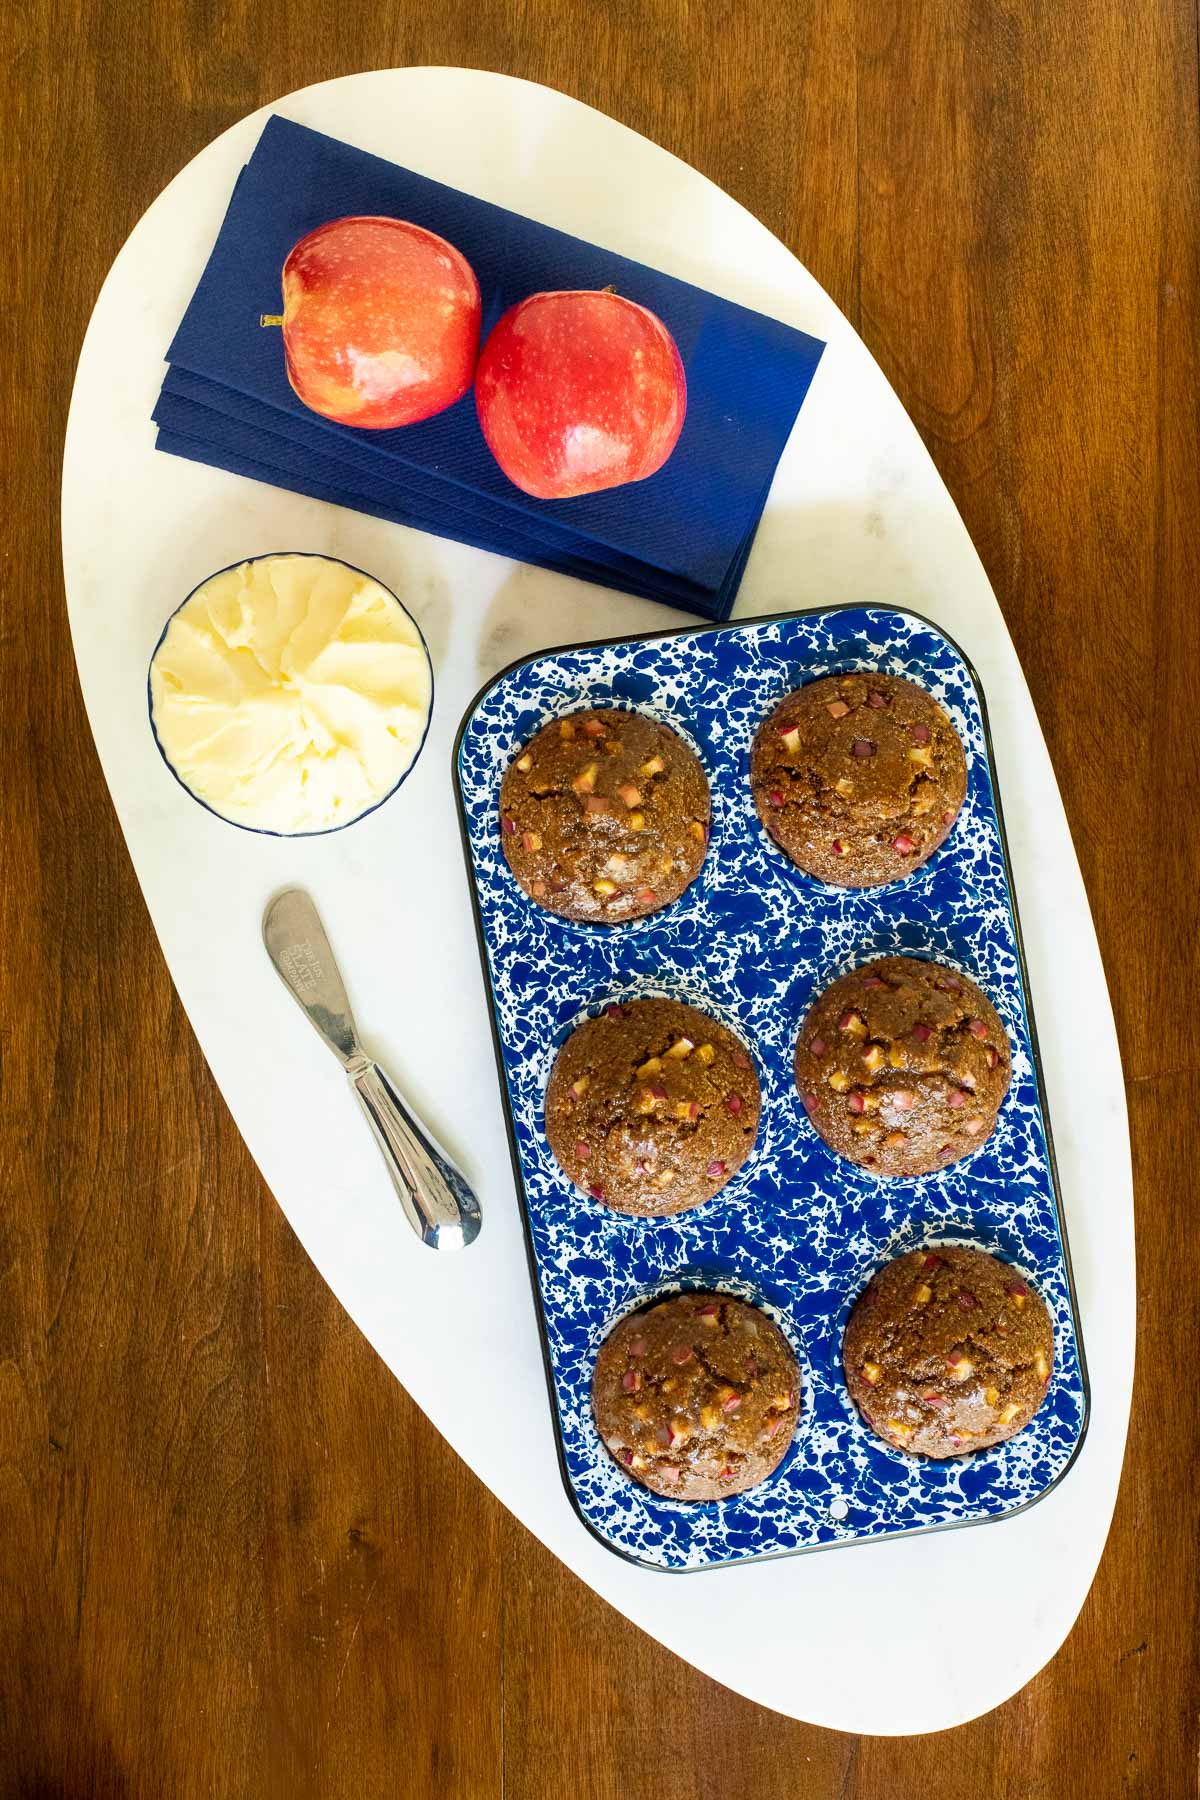 Vertical overhead photo of Honey-Glazed Apple Bran Muffins in a blue and white baking tin with apples and butter on the side.